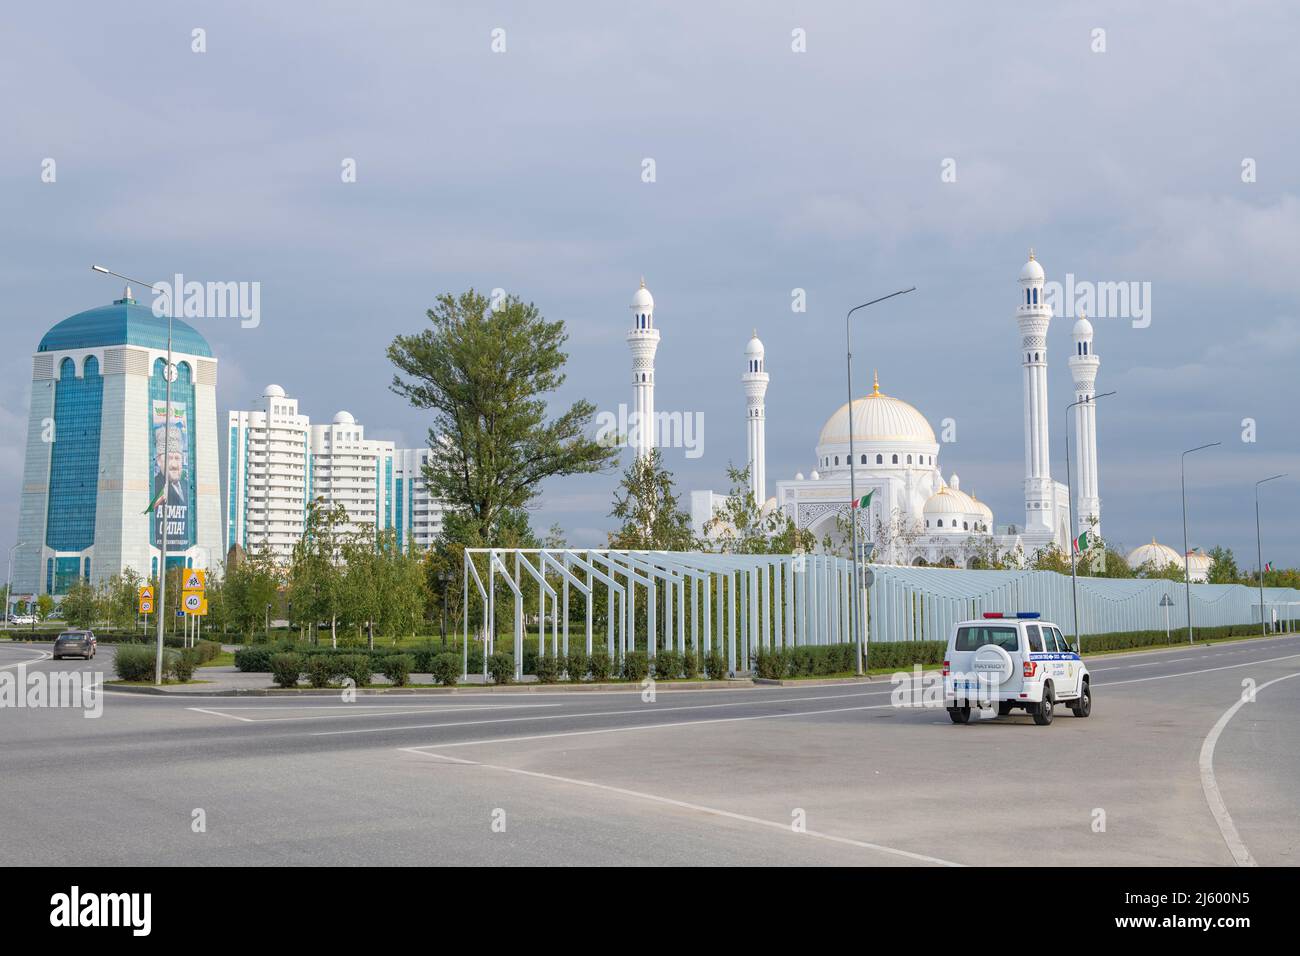 SHALI, RUSSIA - SEPTEMBER 29, 2021: Mosque "Pride of Muslims" in the cityscape on a September cloudy morning Stock Photo